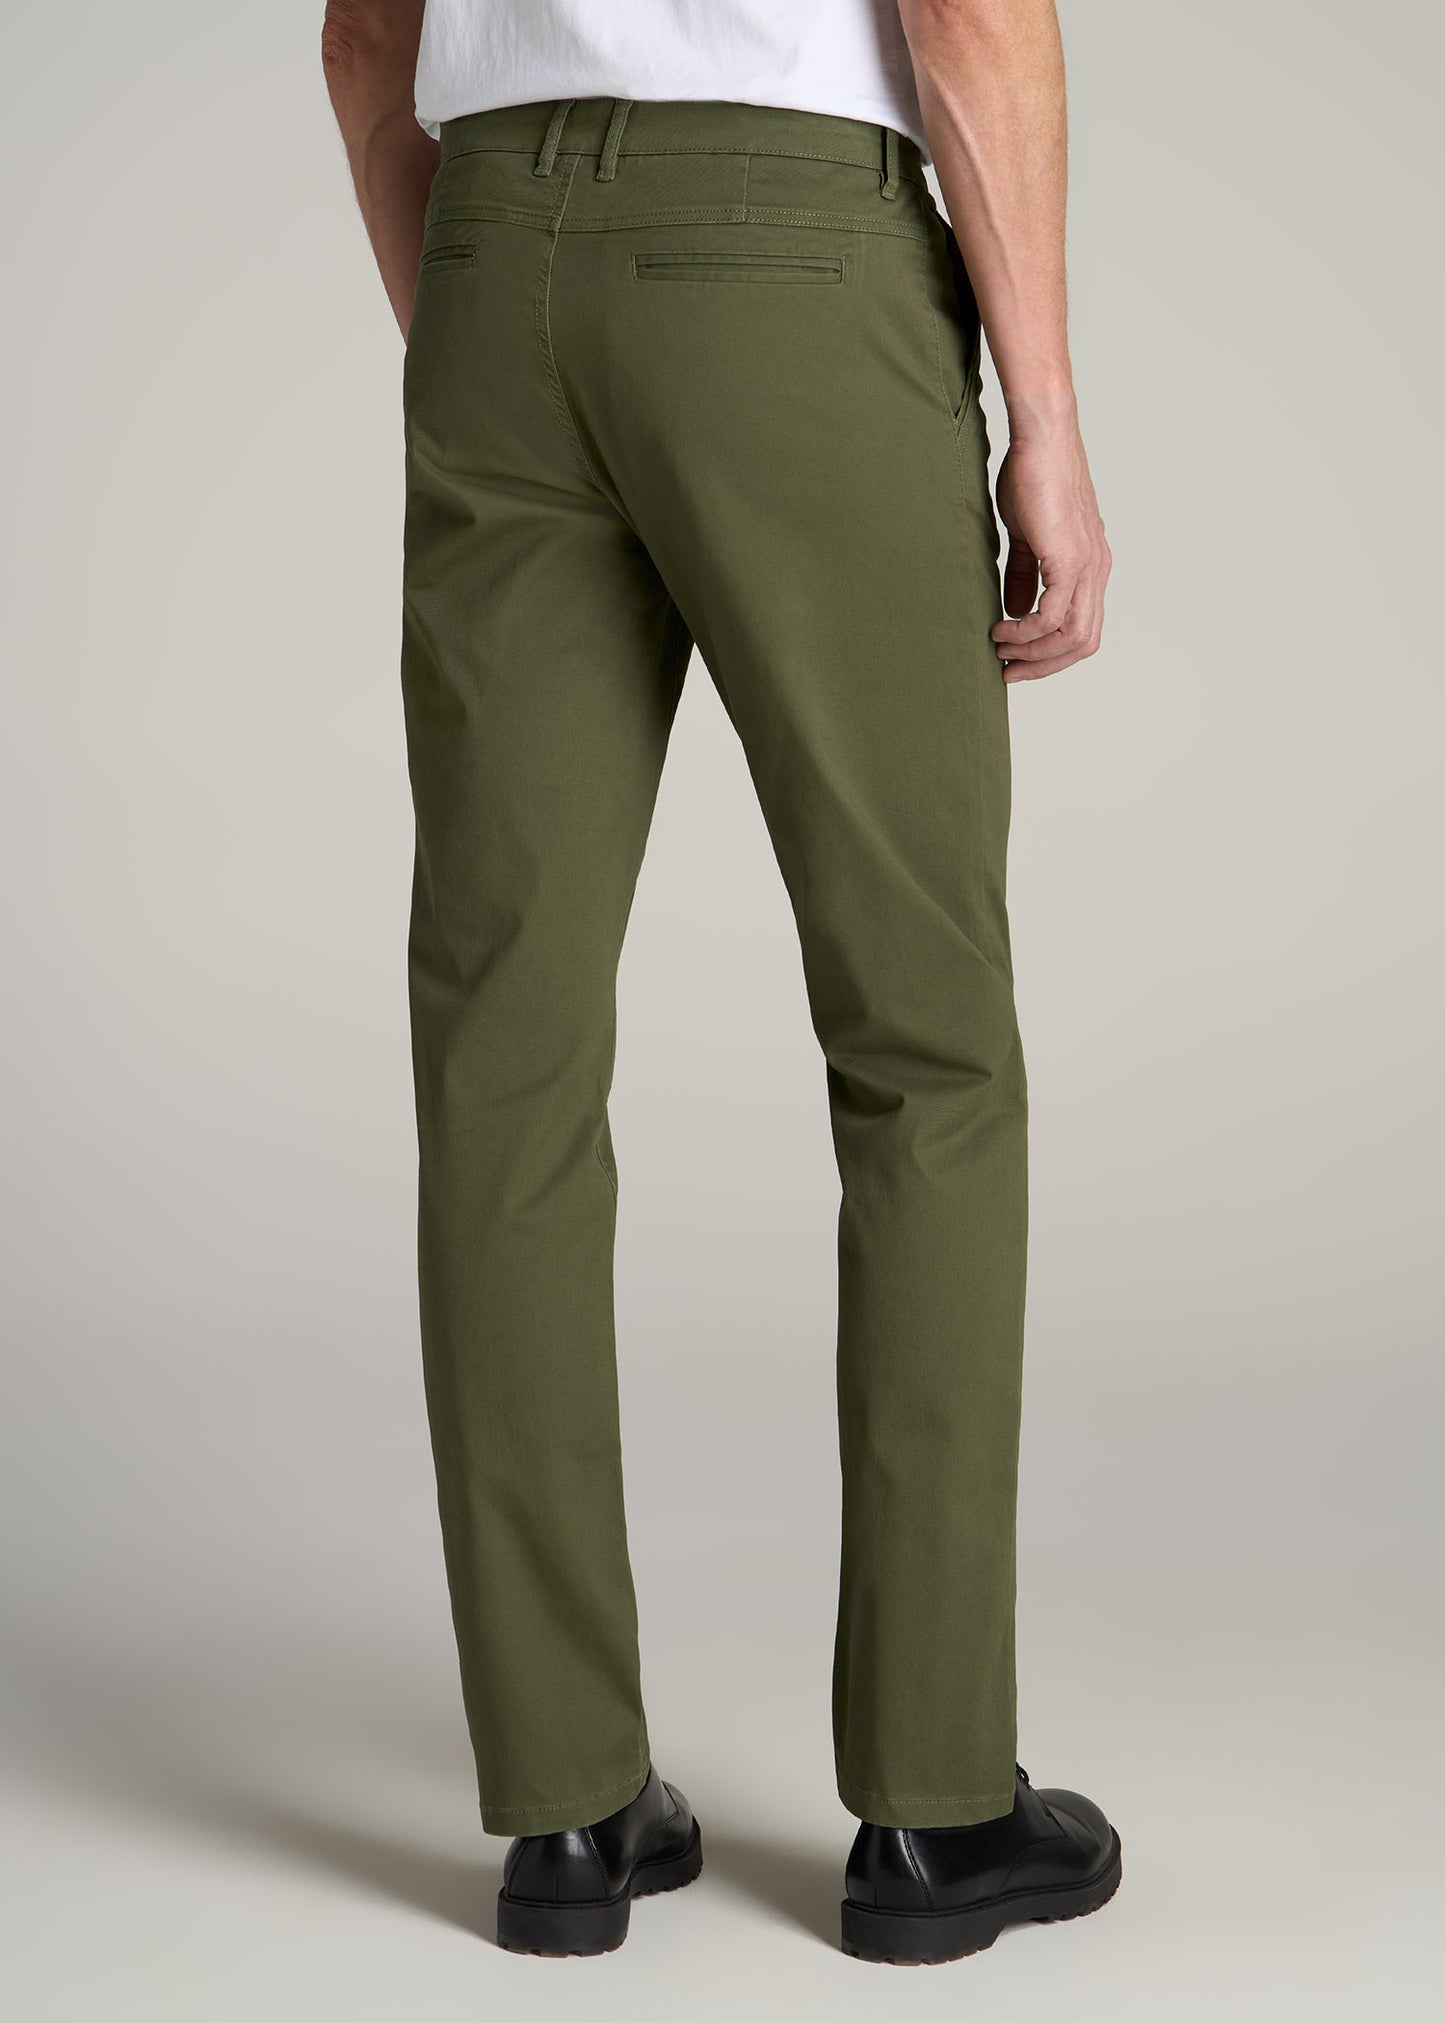 Carman TAPERED Chinos in Bright Olive - Pants for Tall Men